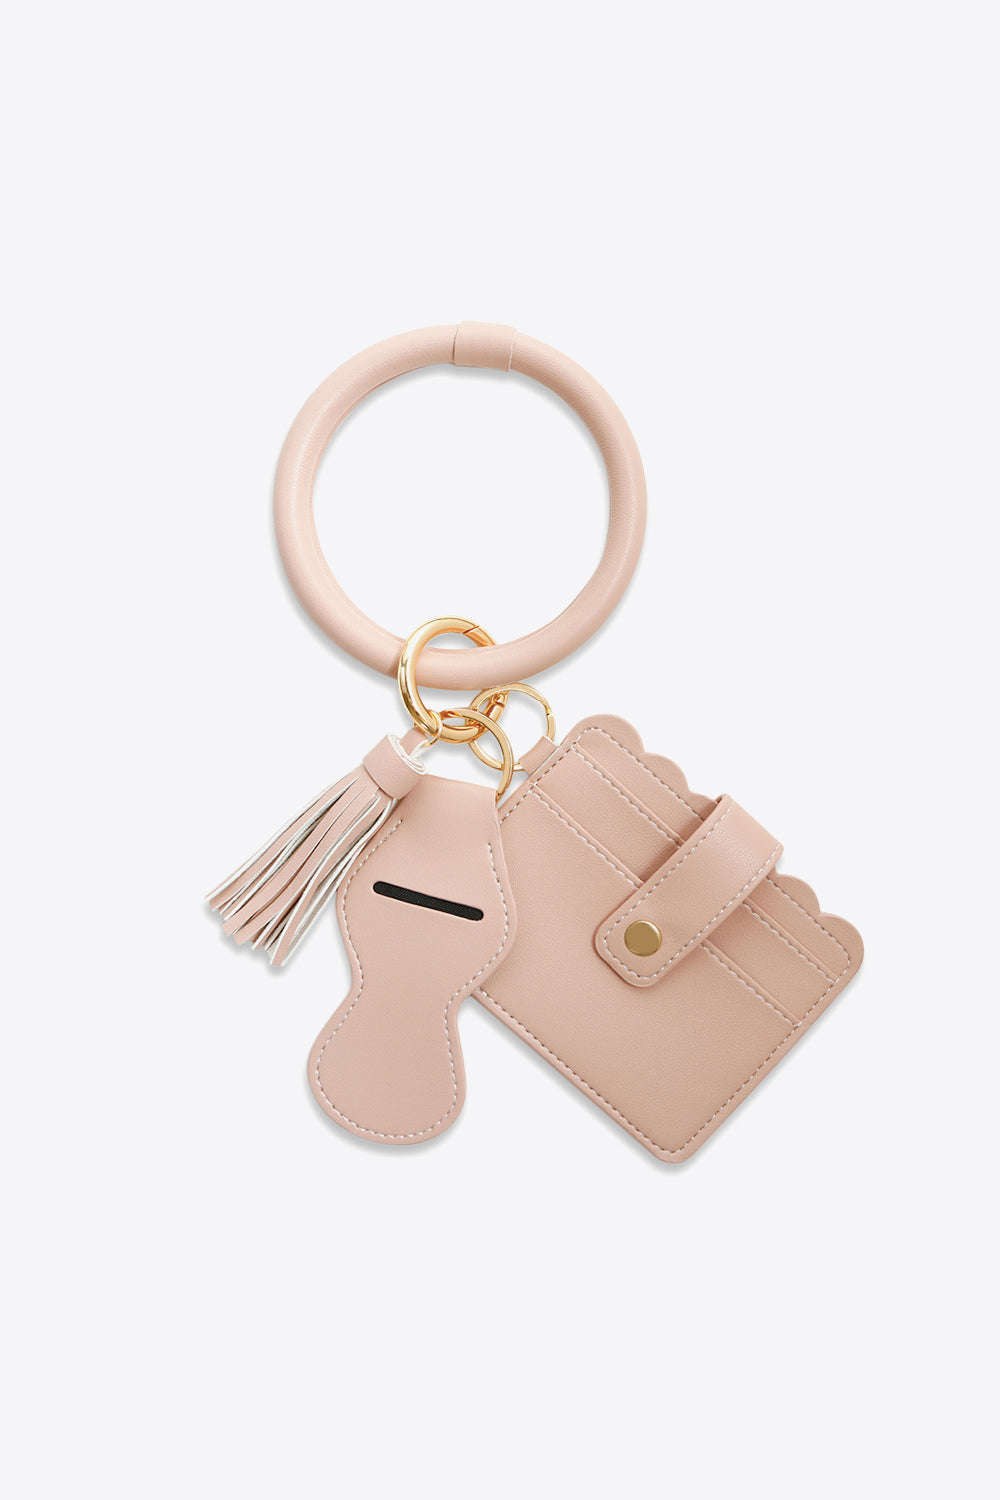 Trendsi Cupid Beauty Supplies Pale Blush / One Size Keychains PU Wristlet Keychain with Card Holder